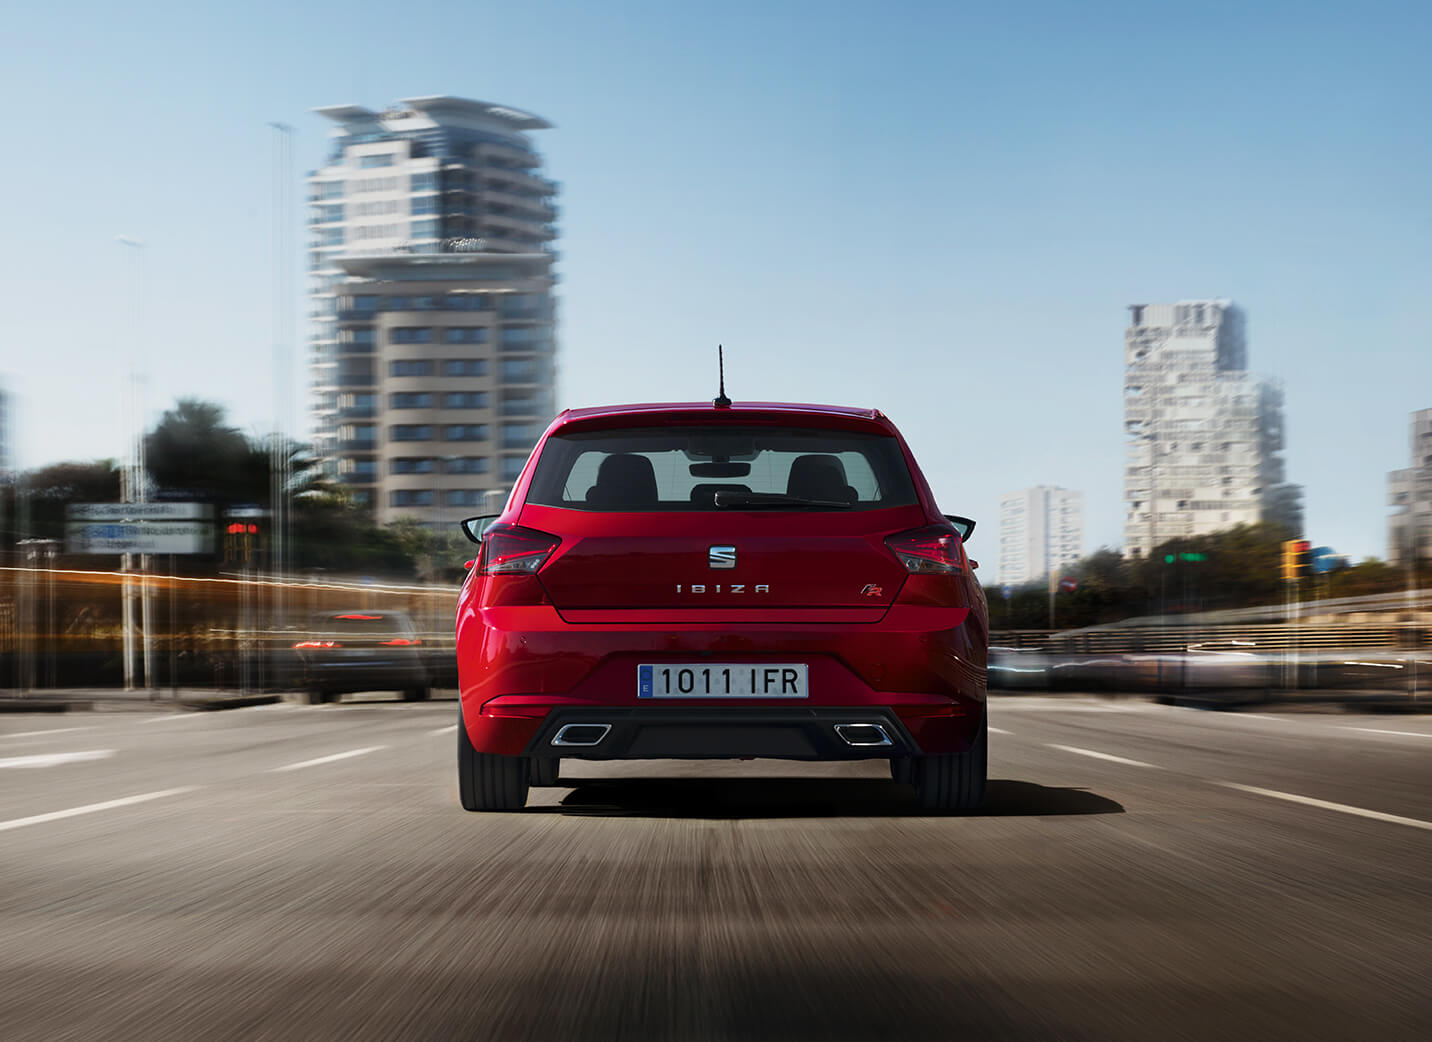 SEAT Service and maintenance - Rear view of a SEAT Ibiza hatchback city car driving